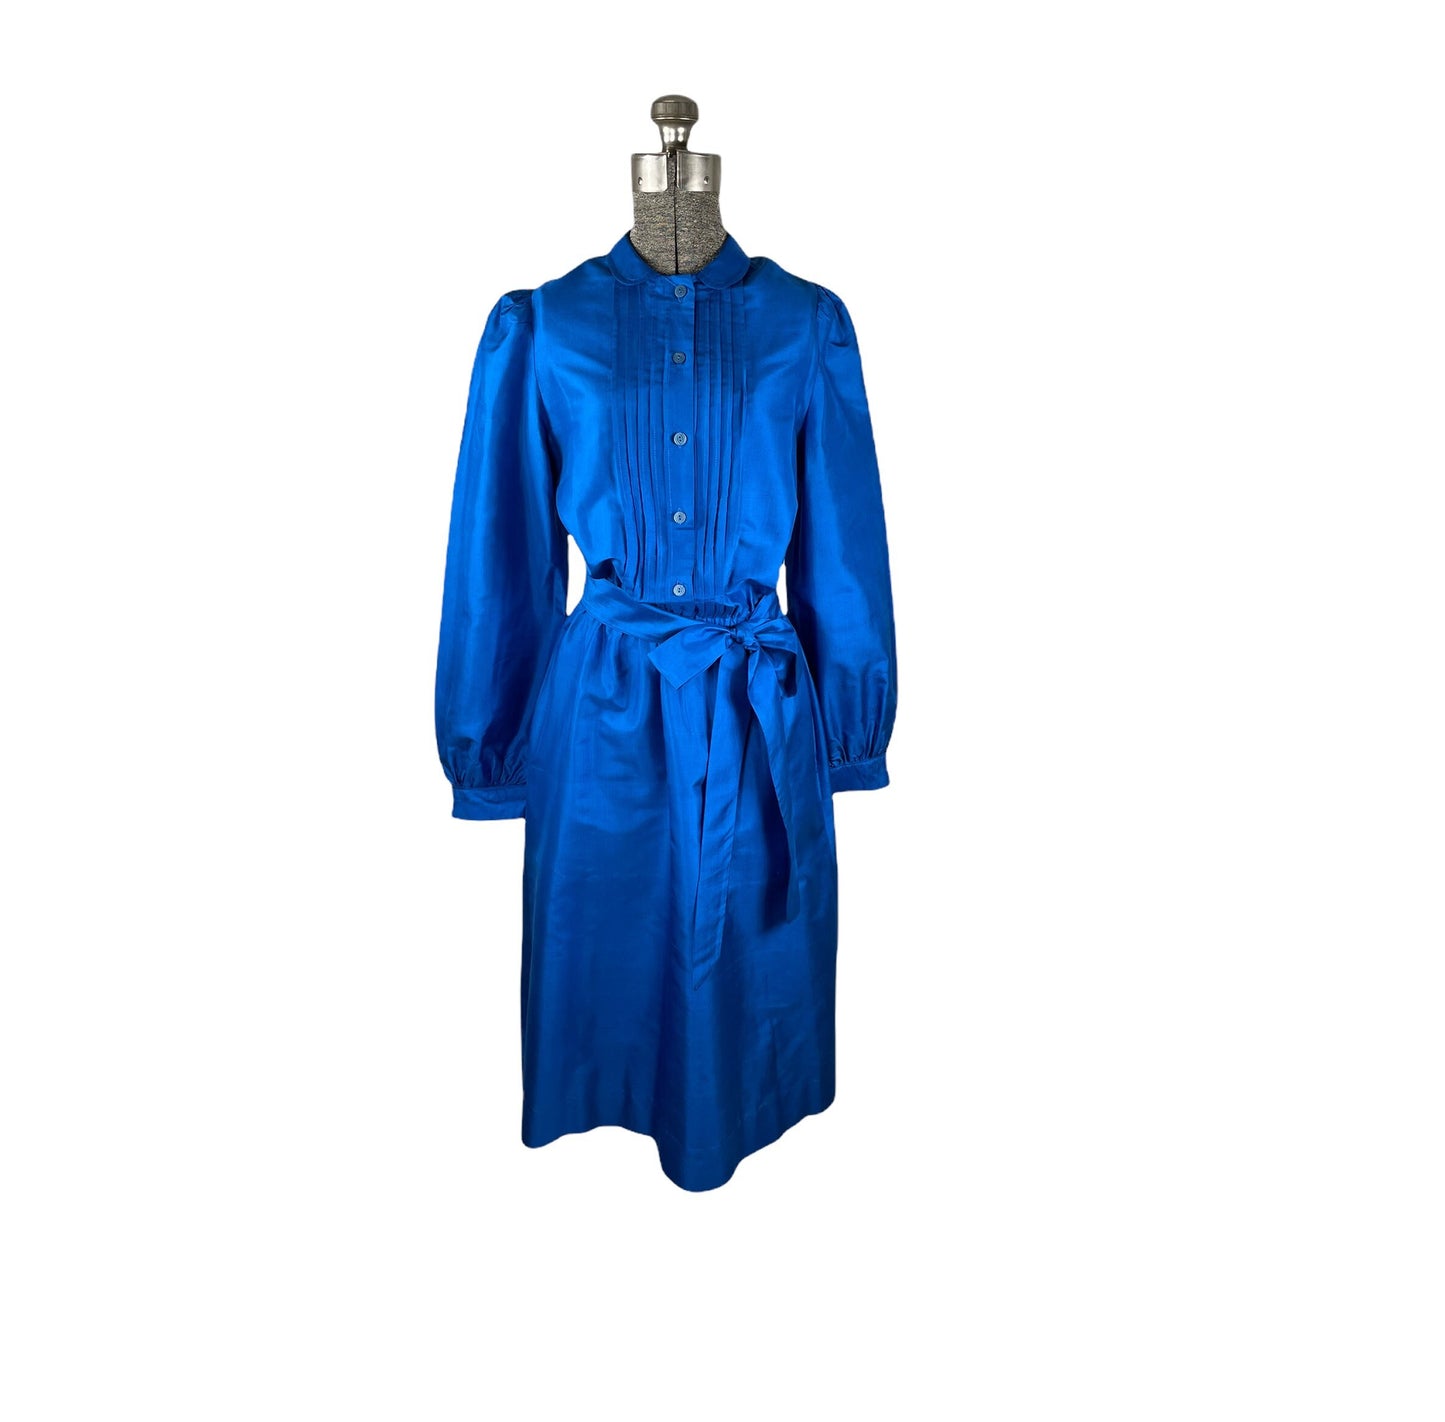 1980s silk shirtwaist dress royal blue with pleated bodice and tie belt Size S/M